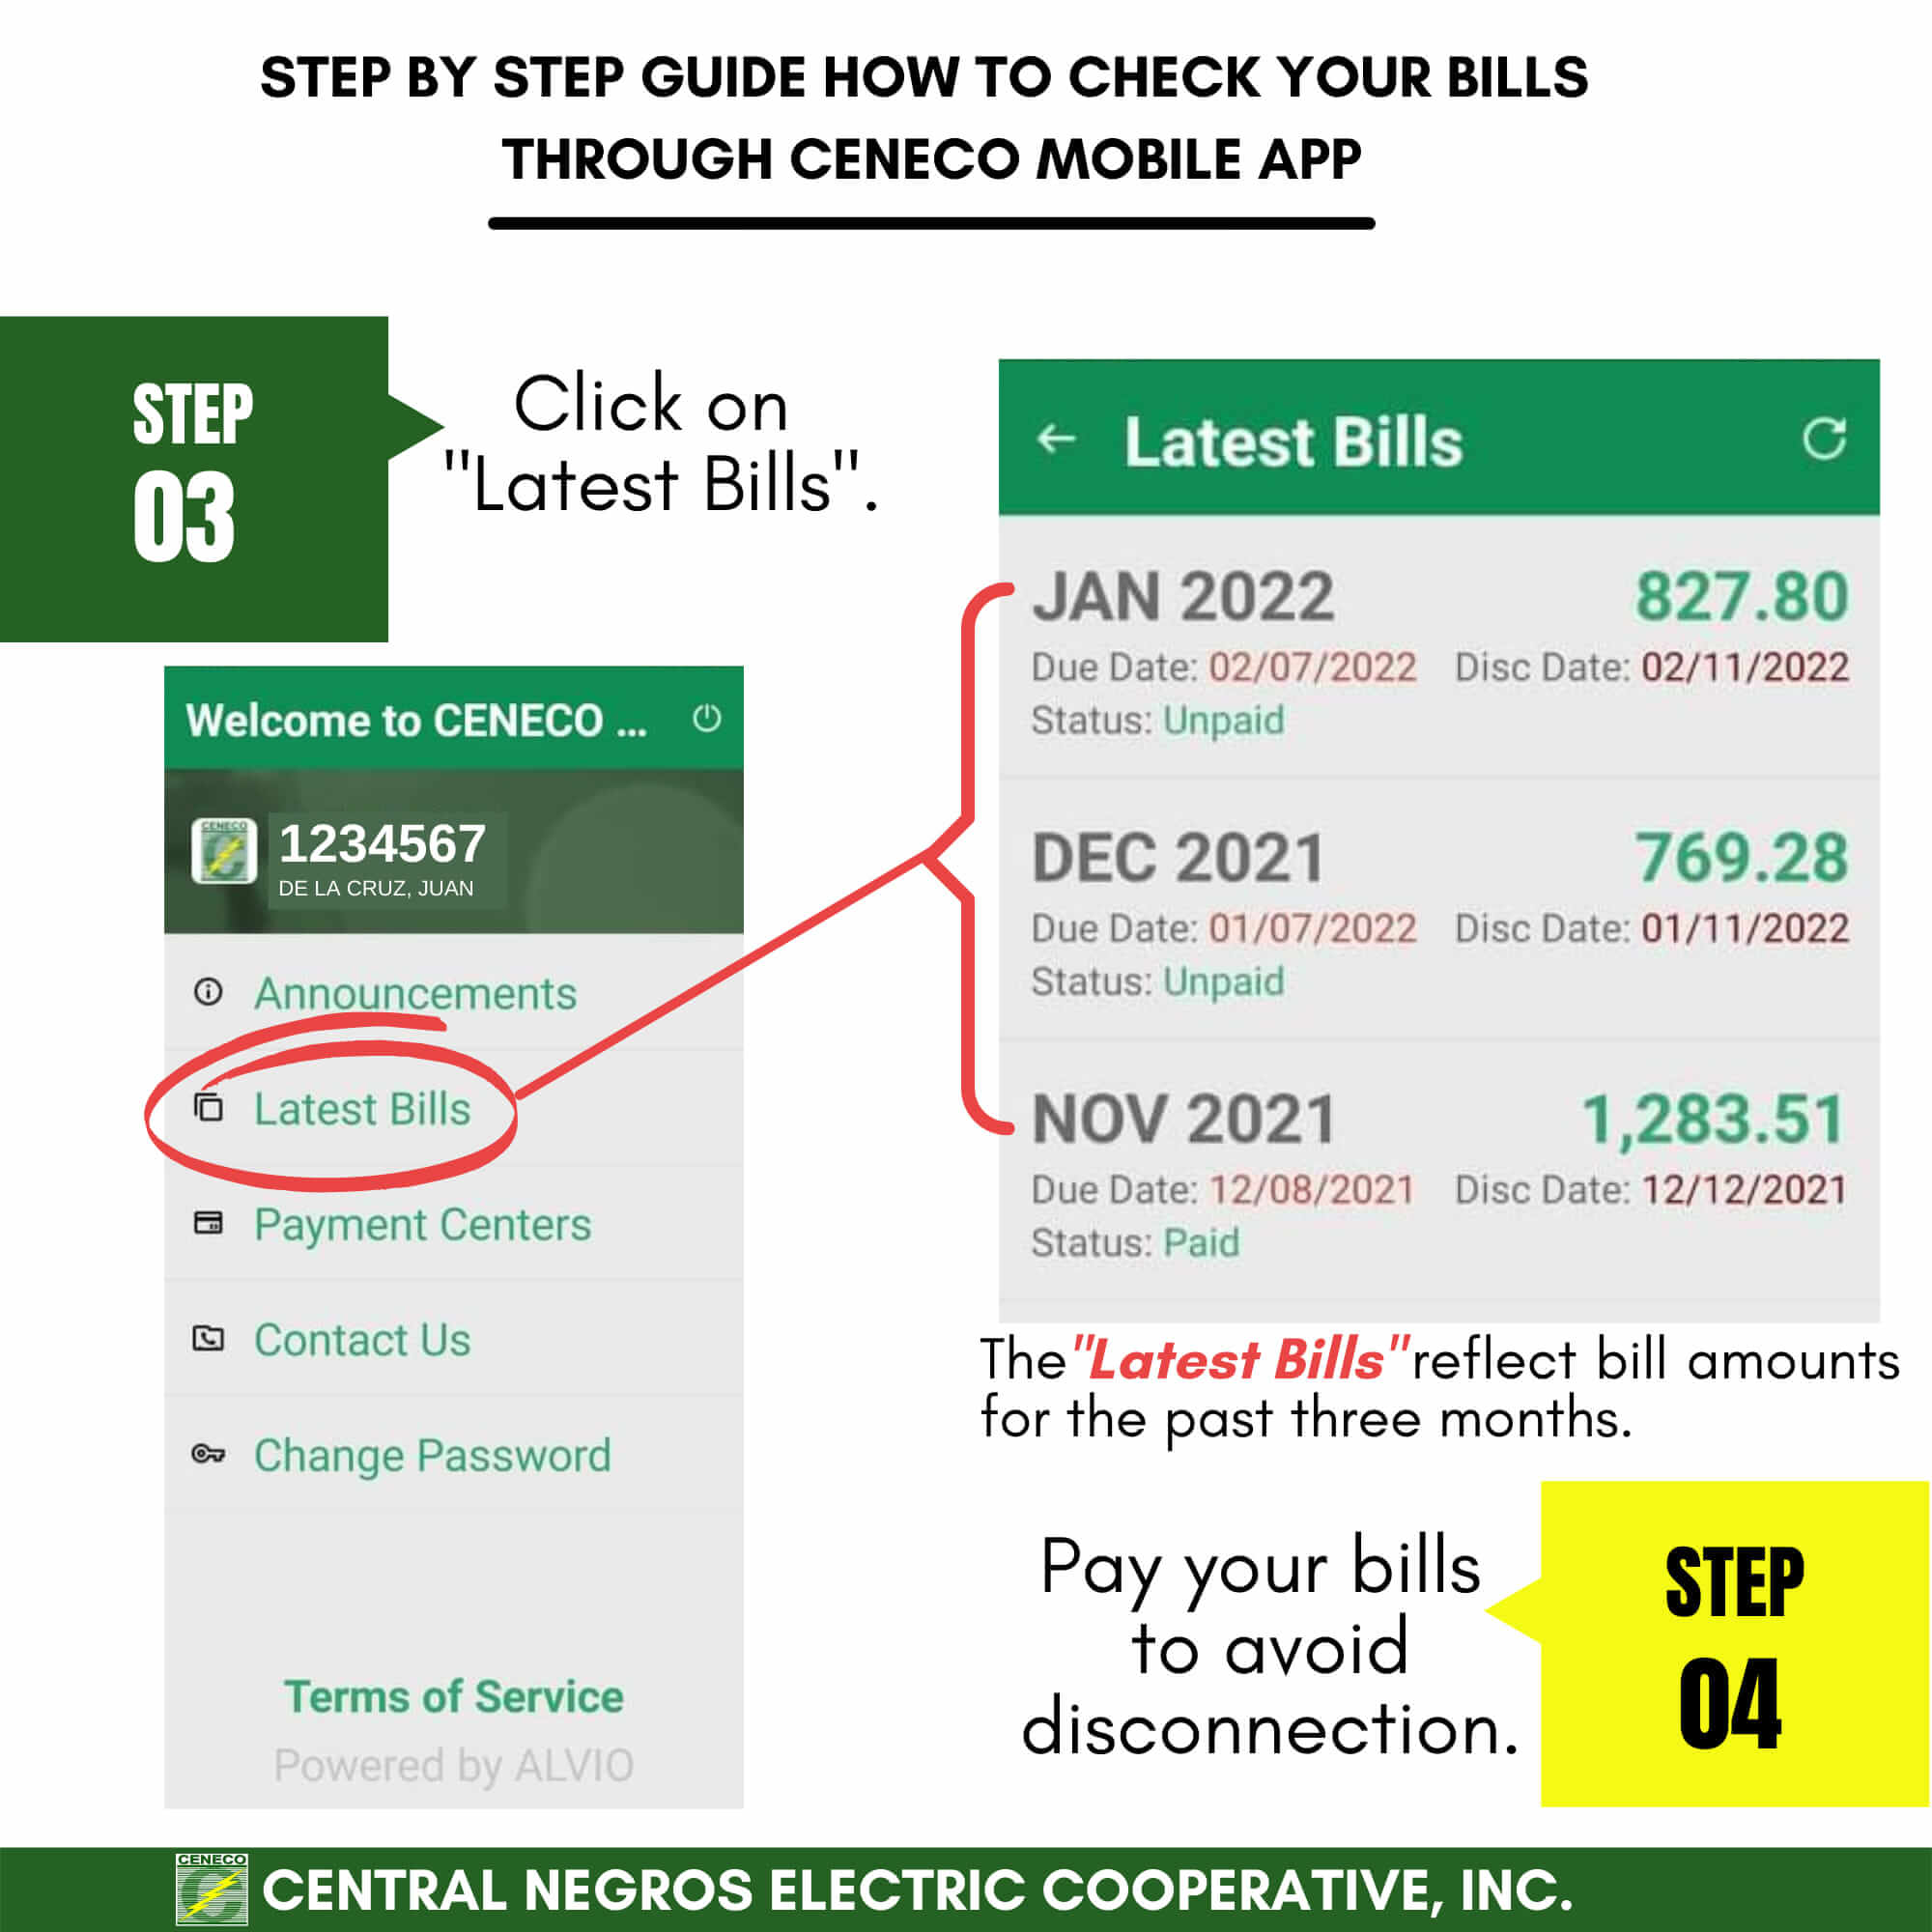 Access your bills anytime through the CENECO mobile app - Central